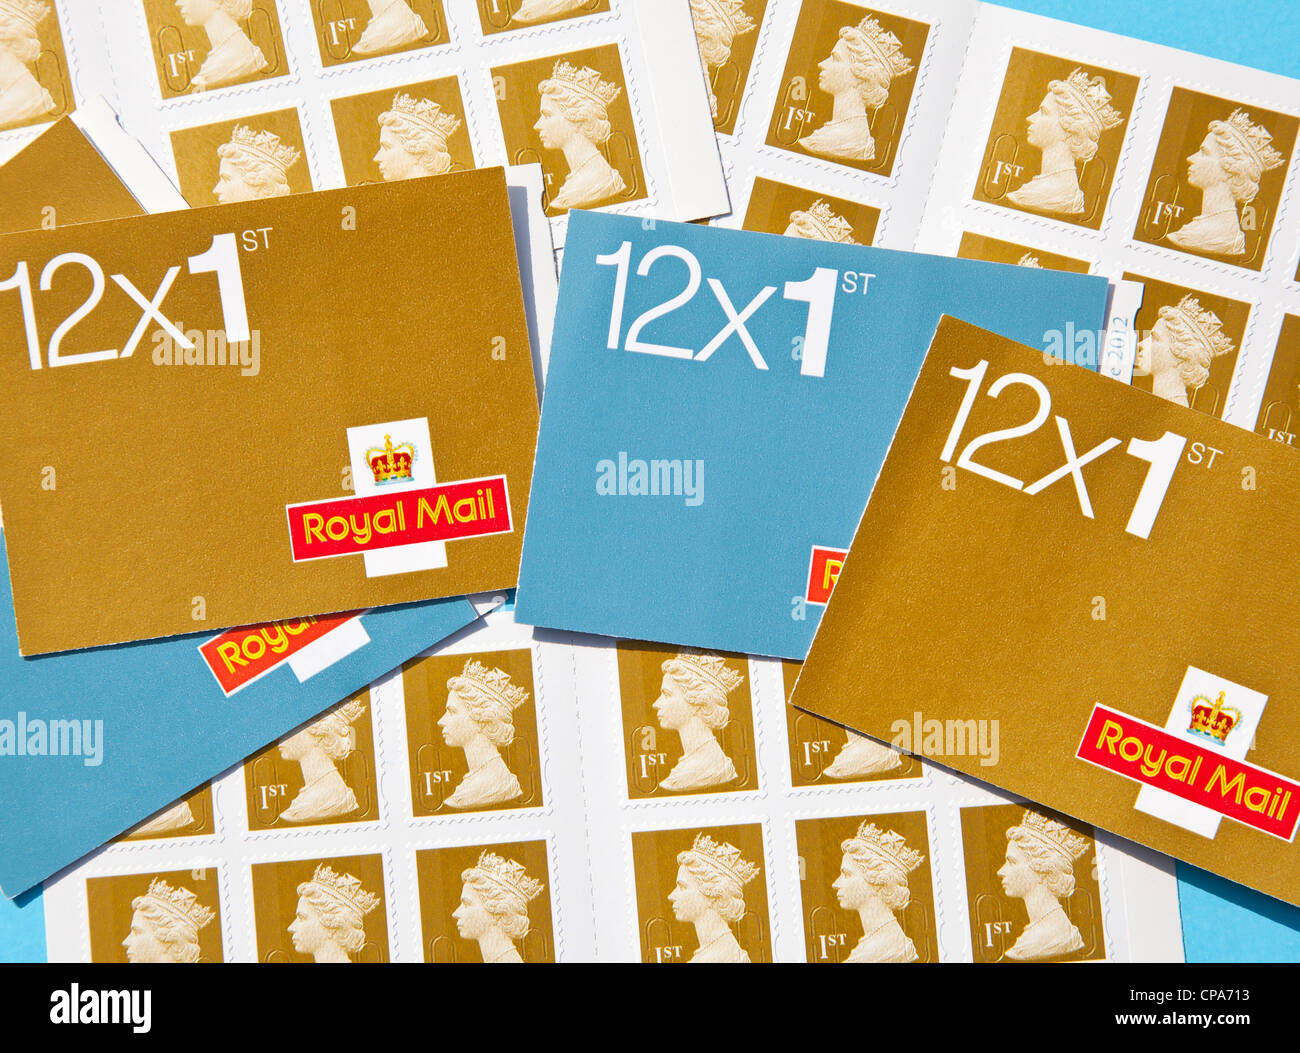 First class postage stamps Stock Photo